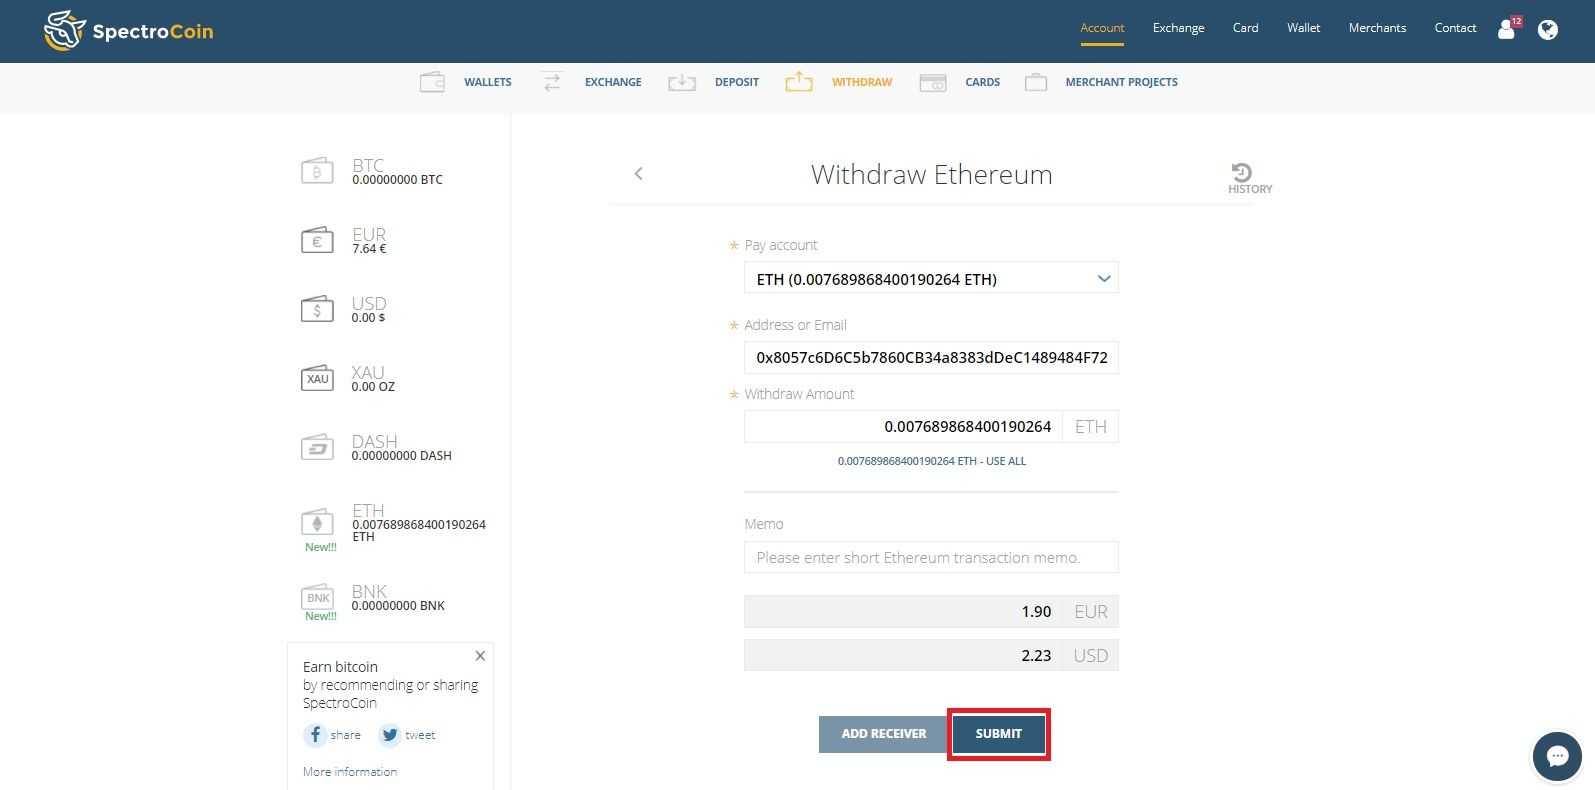 SpectroCoin withdraw Ethereum page with highlighted "submit" option